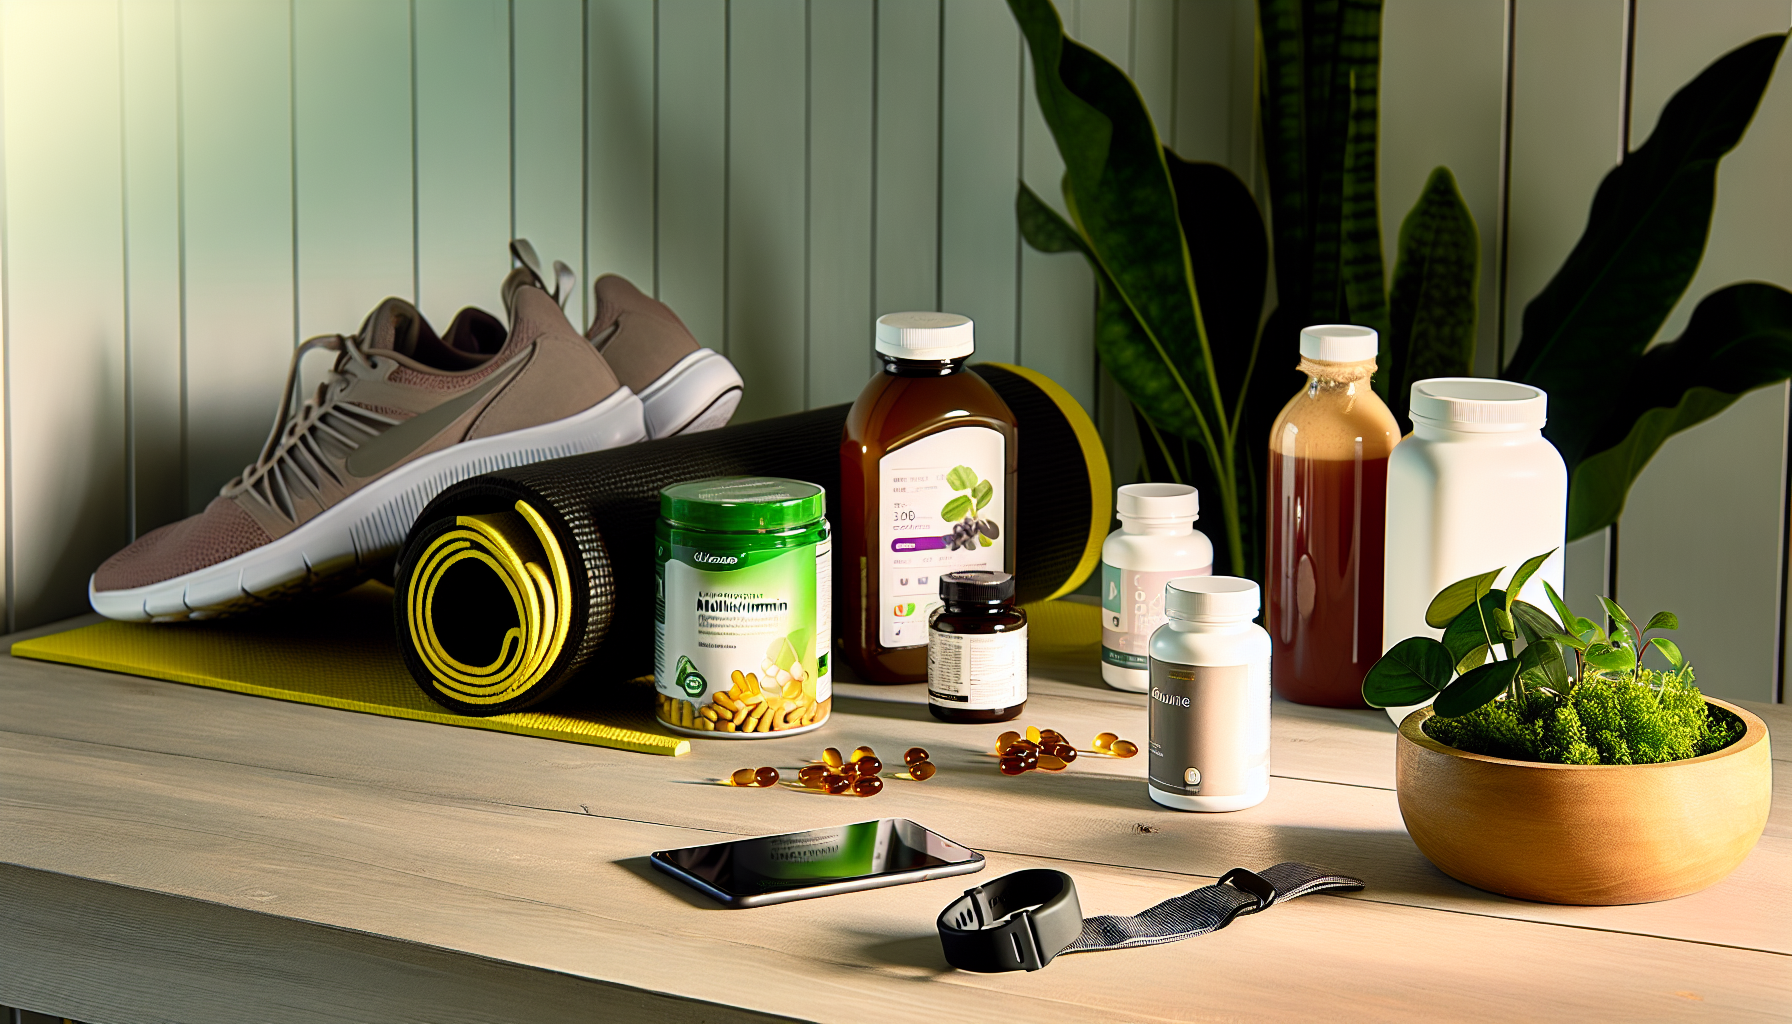 Health and wellness products